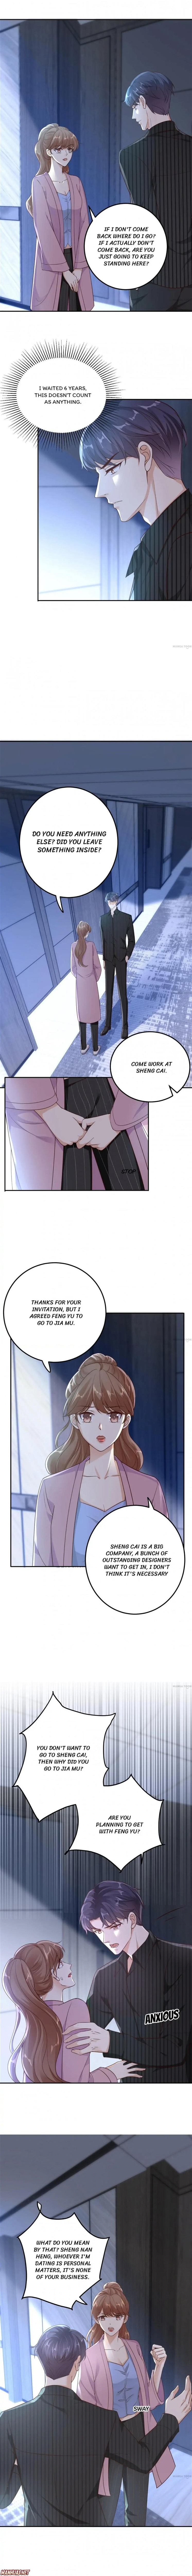 Breakup Loading 99% Chapter 24 - Page 0